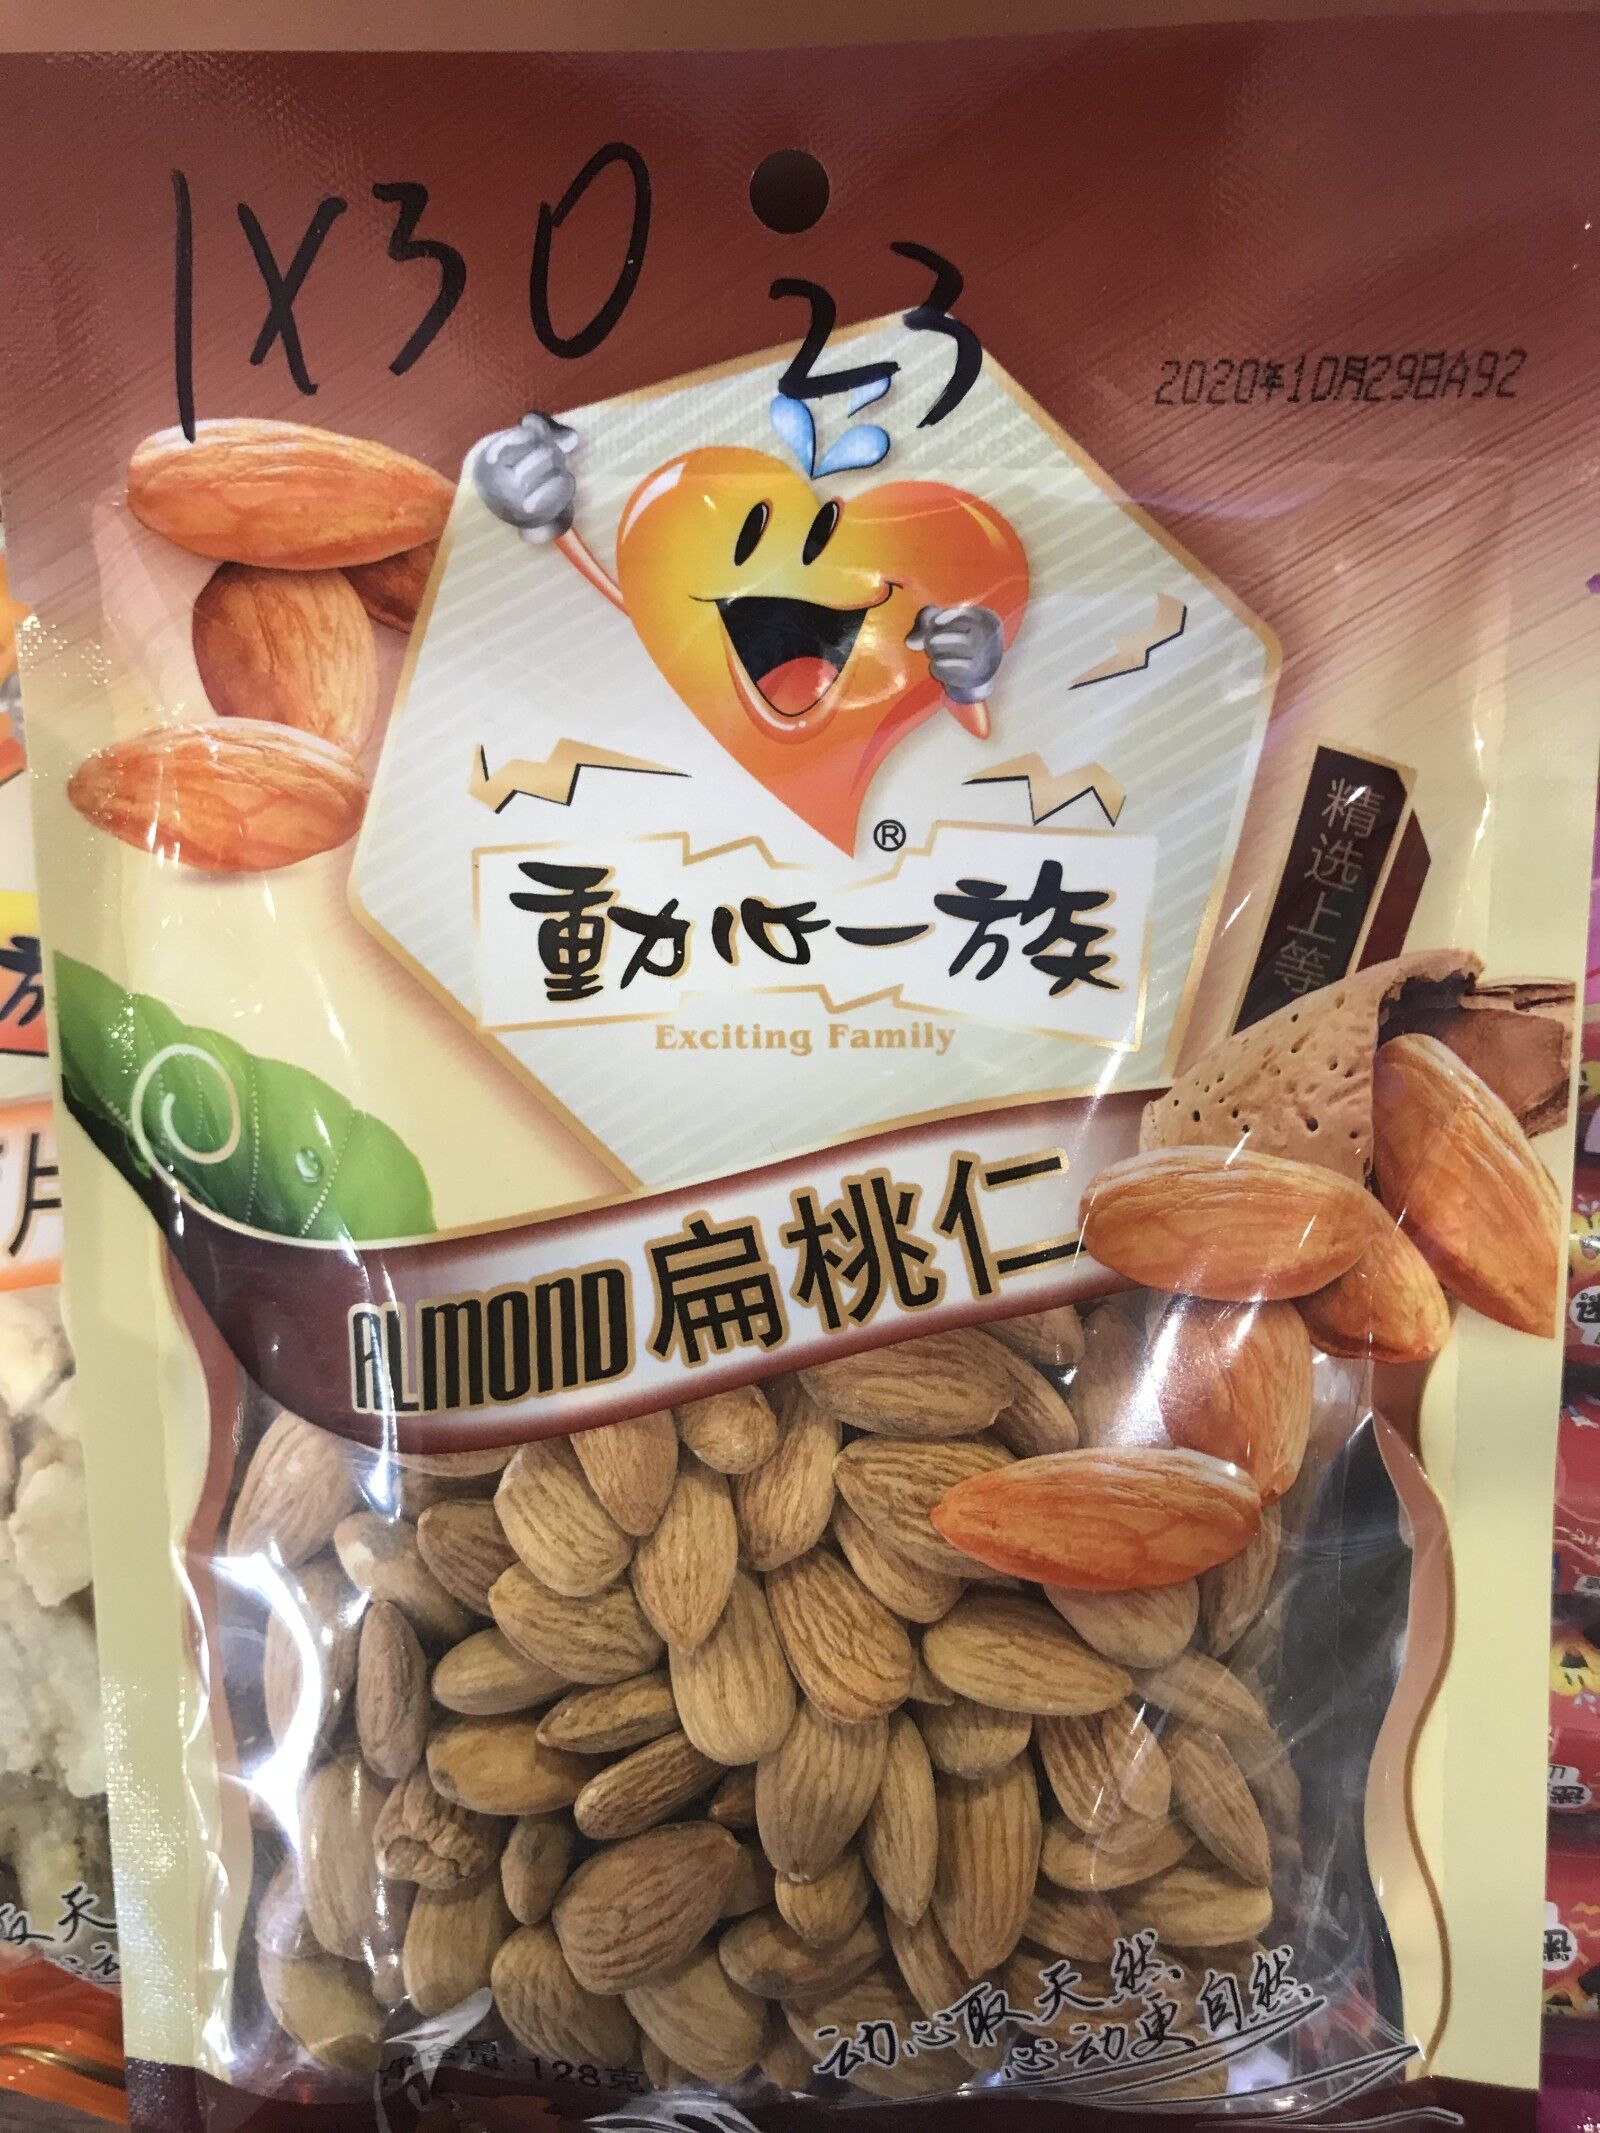 036 nuts: Almond 